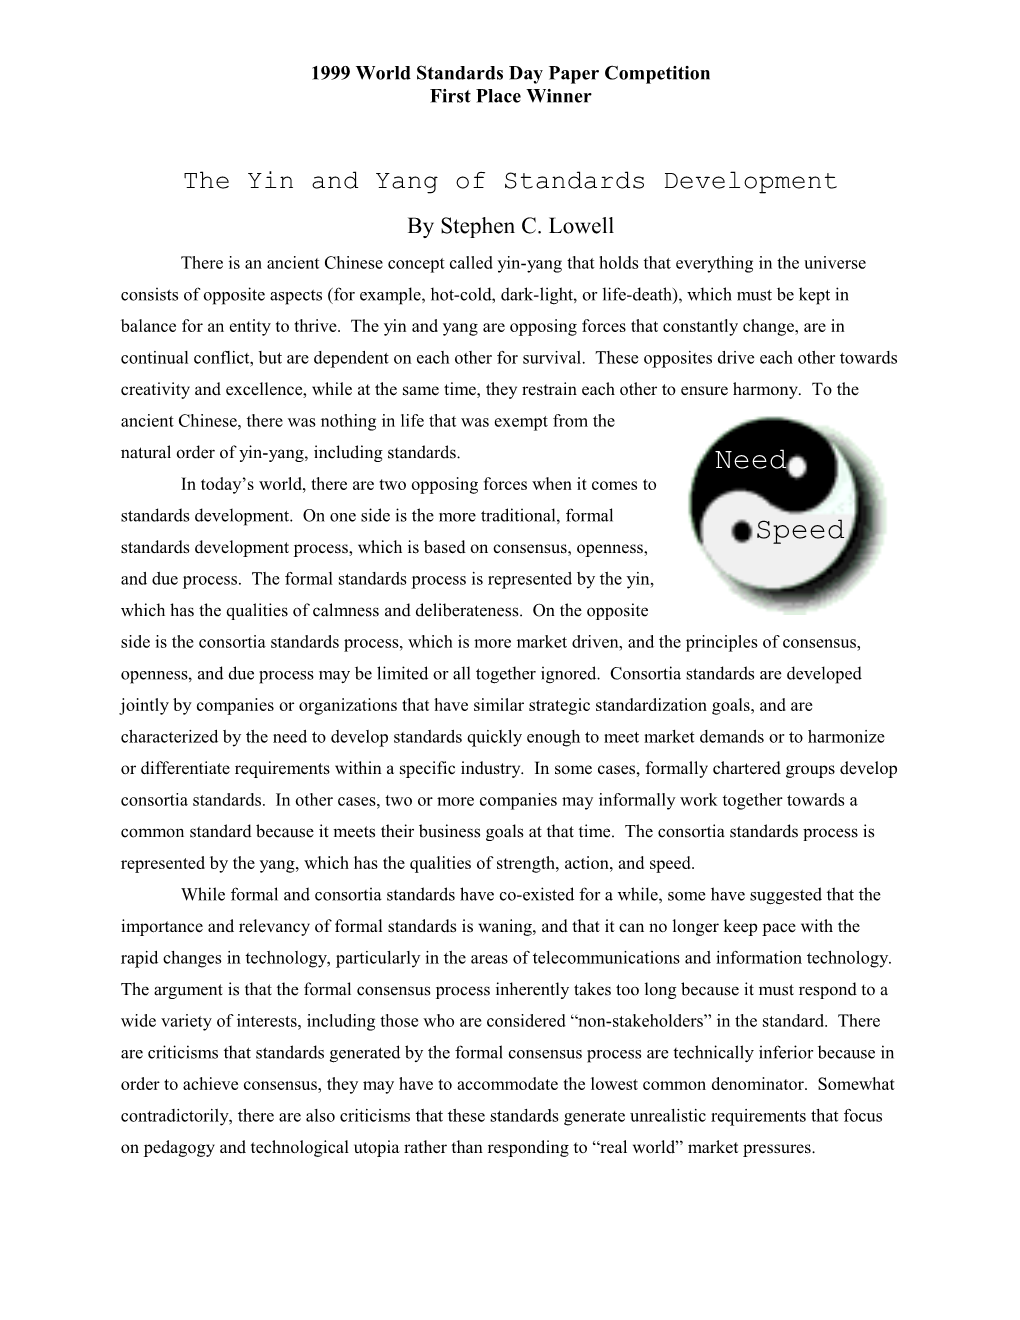 There Is an Ancient Chinese Concept Called Yin-Yang, Which Holds That Everything in The